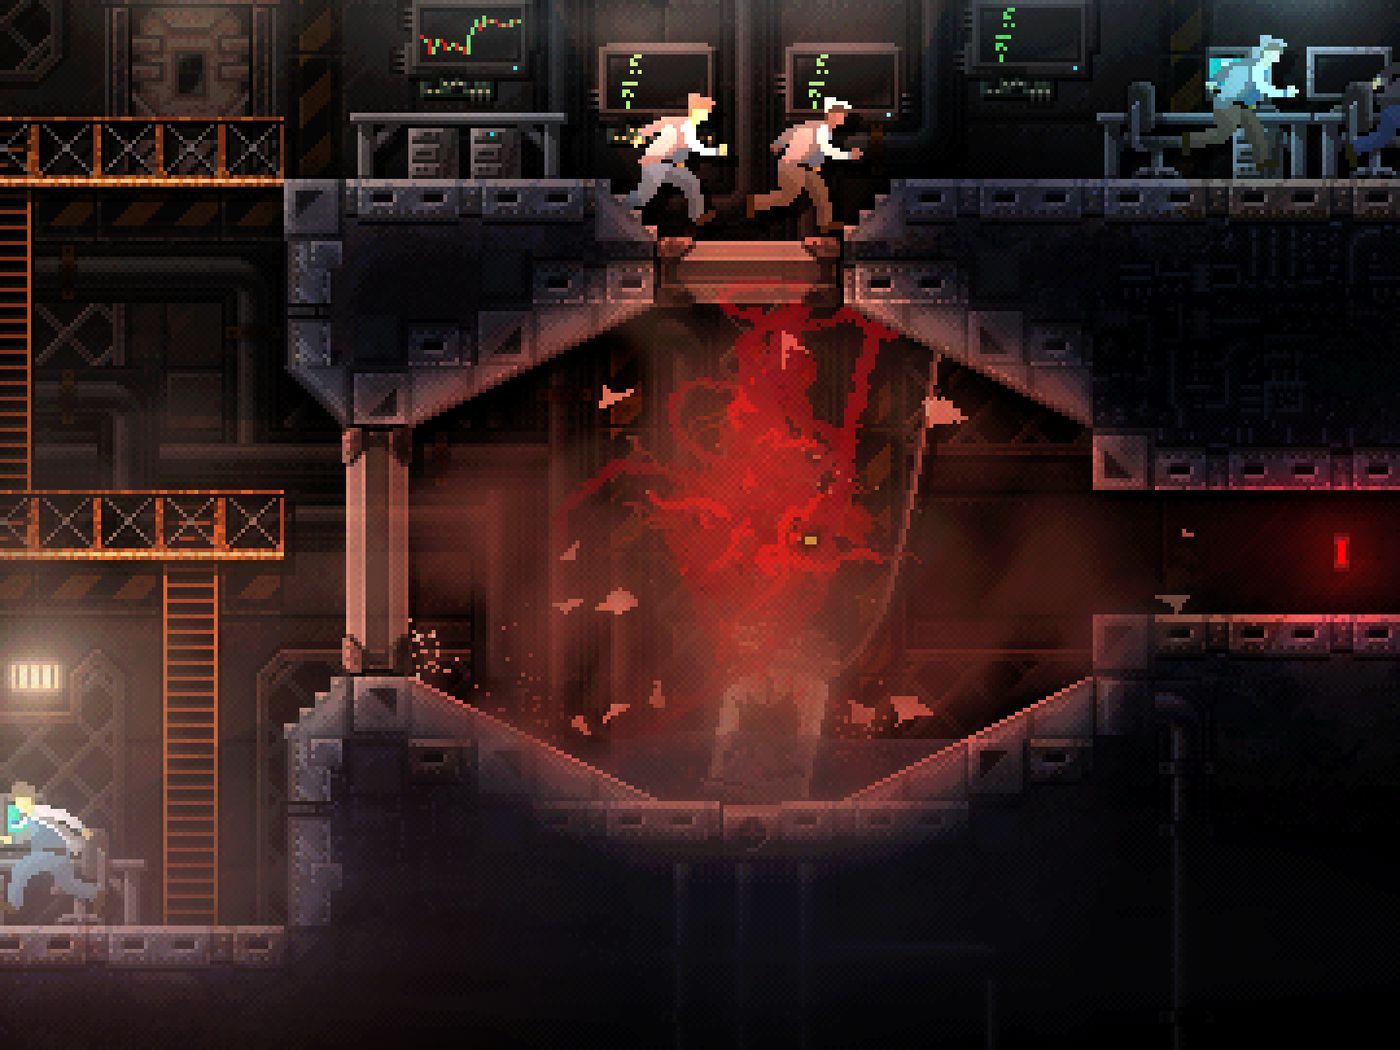 Carrion is a monstrous, slinky game of evil Metroidvania